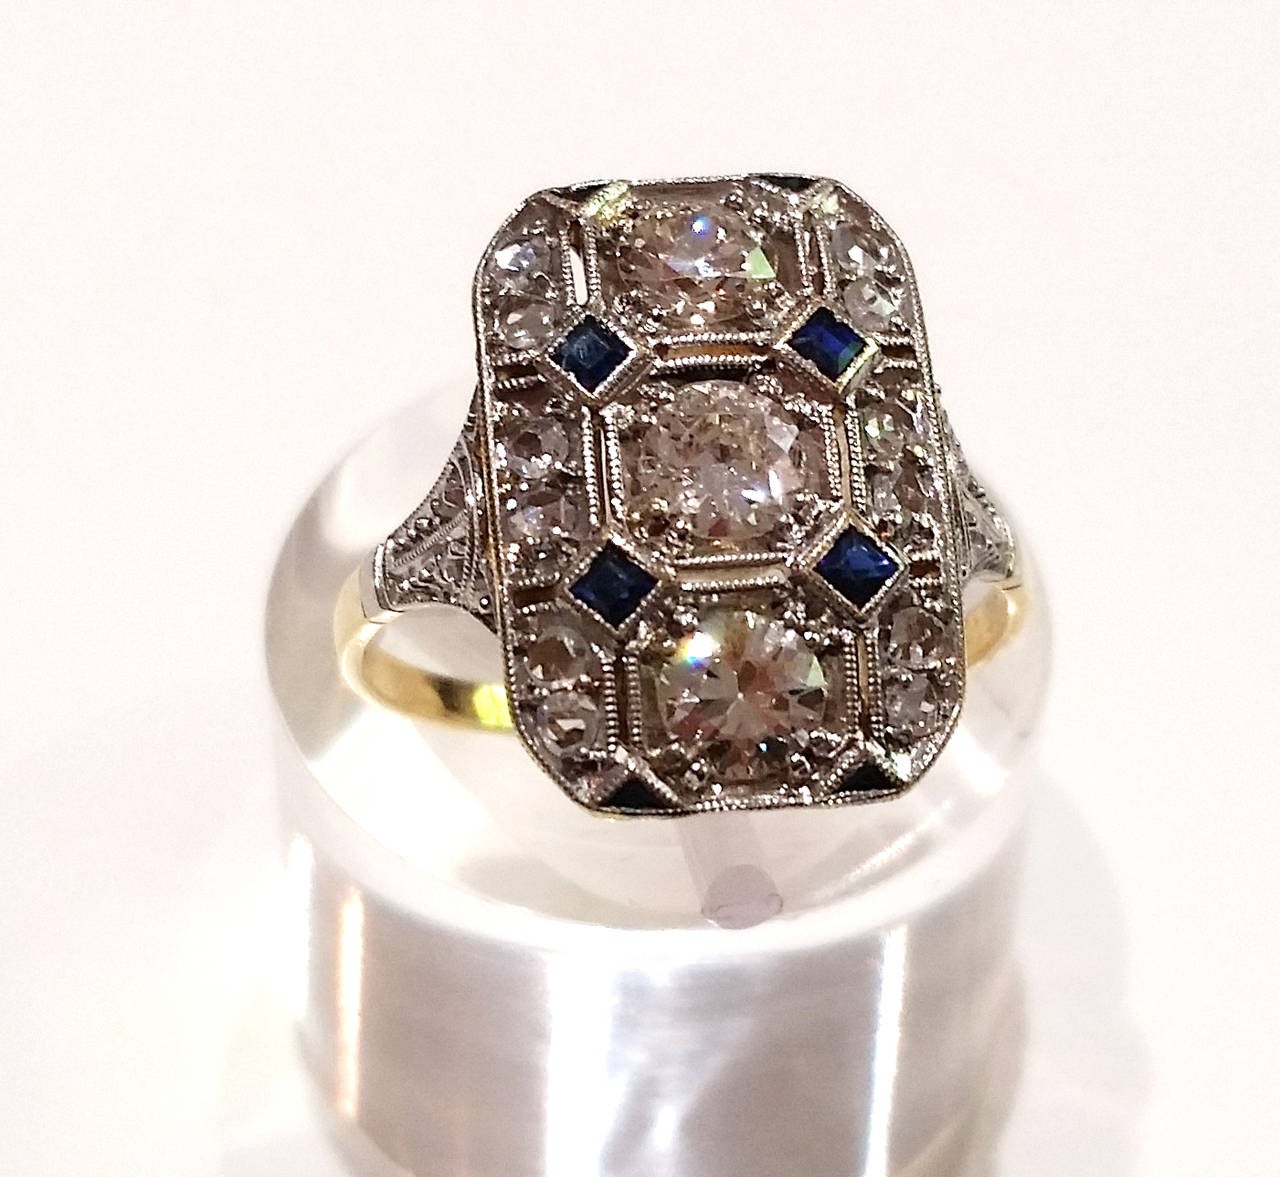 Early Art Deco ring in rectangular shape, with a geometrical pattern in diamonds and blue sapphires.

18k Yellow gold and platinum.
Numbered 26673

3 Old European cut diamonds, total weight 0.75ct approx.
16 rose cut diamonds

Size: EU 14
 